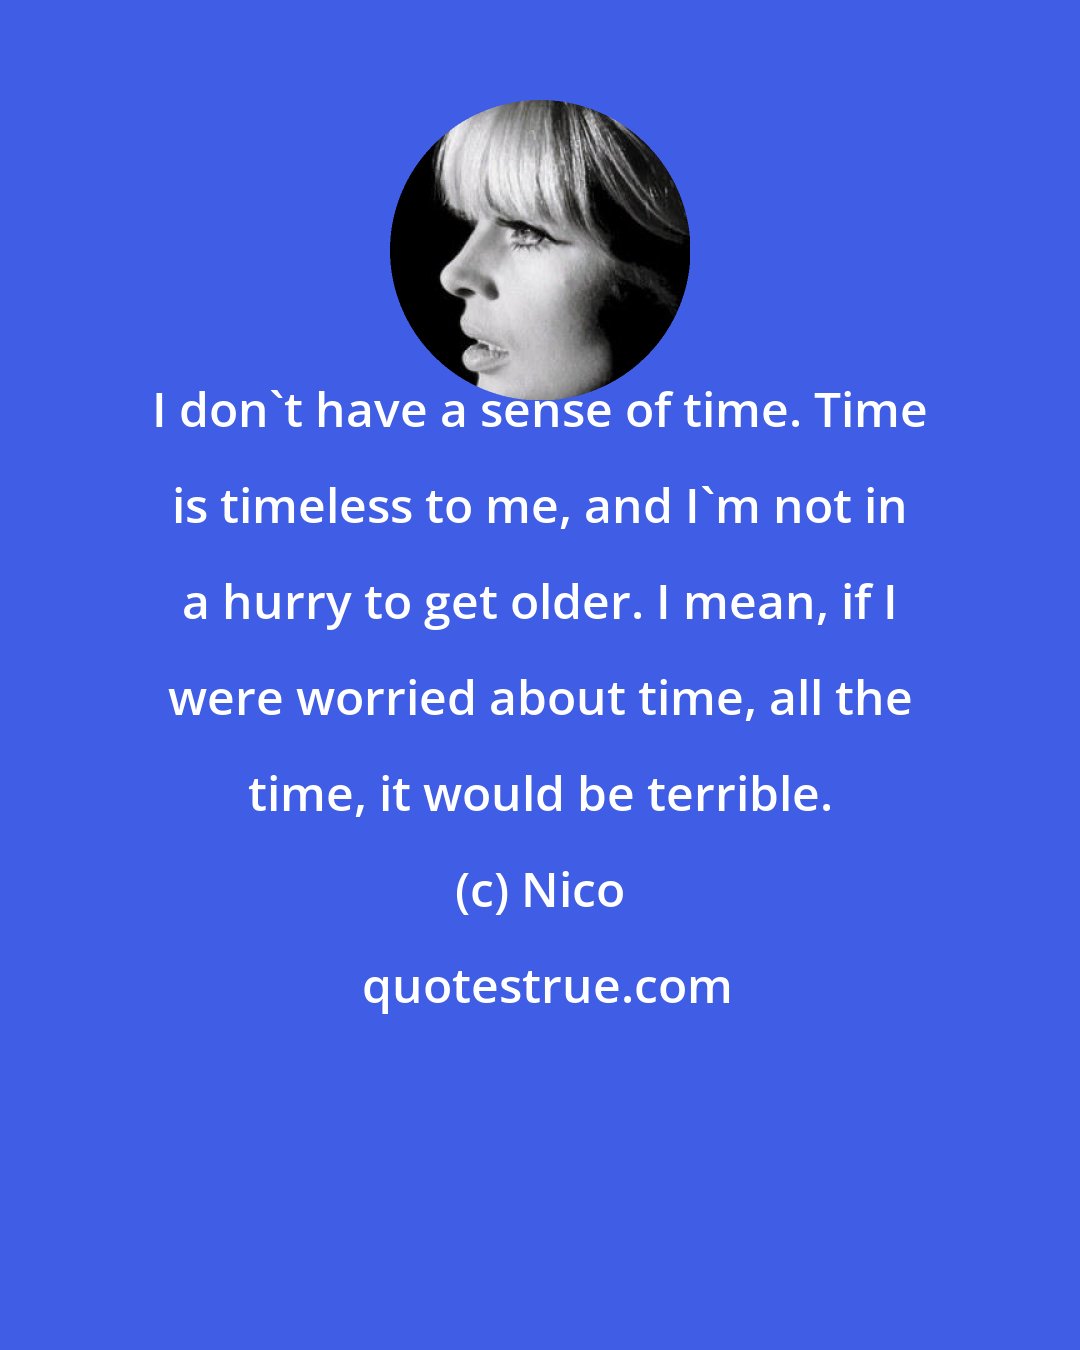 Nico: I don't have a sense of time. Time is timeless to me, and I'm not in a hurry to get older. I mean, if I were worried about time, all the time, it would be terrible.